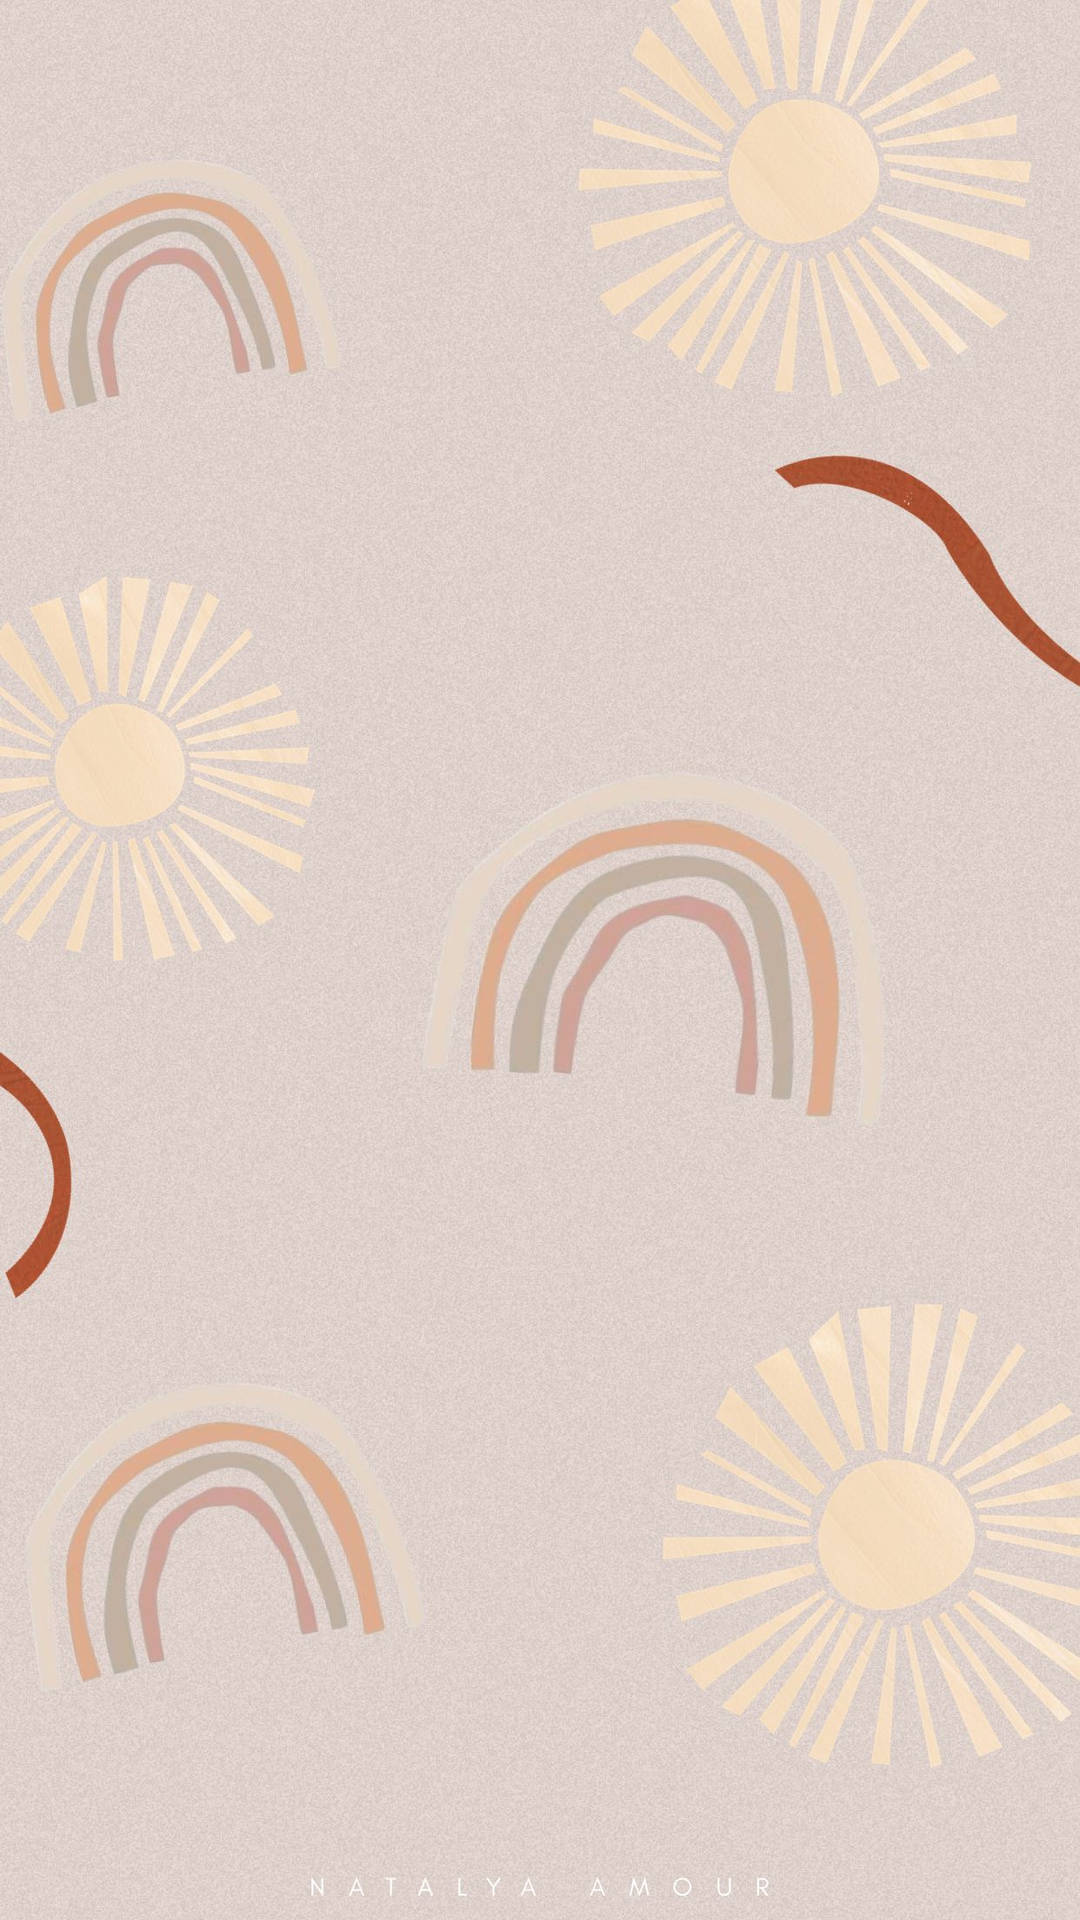 A pattern of suns and rainbows on pink background - Boho, colorful